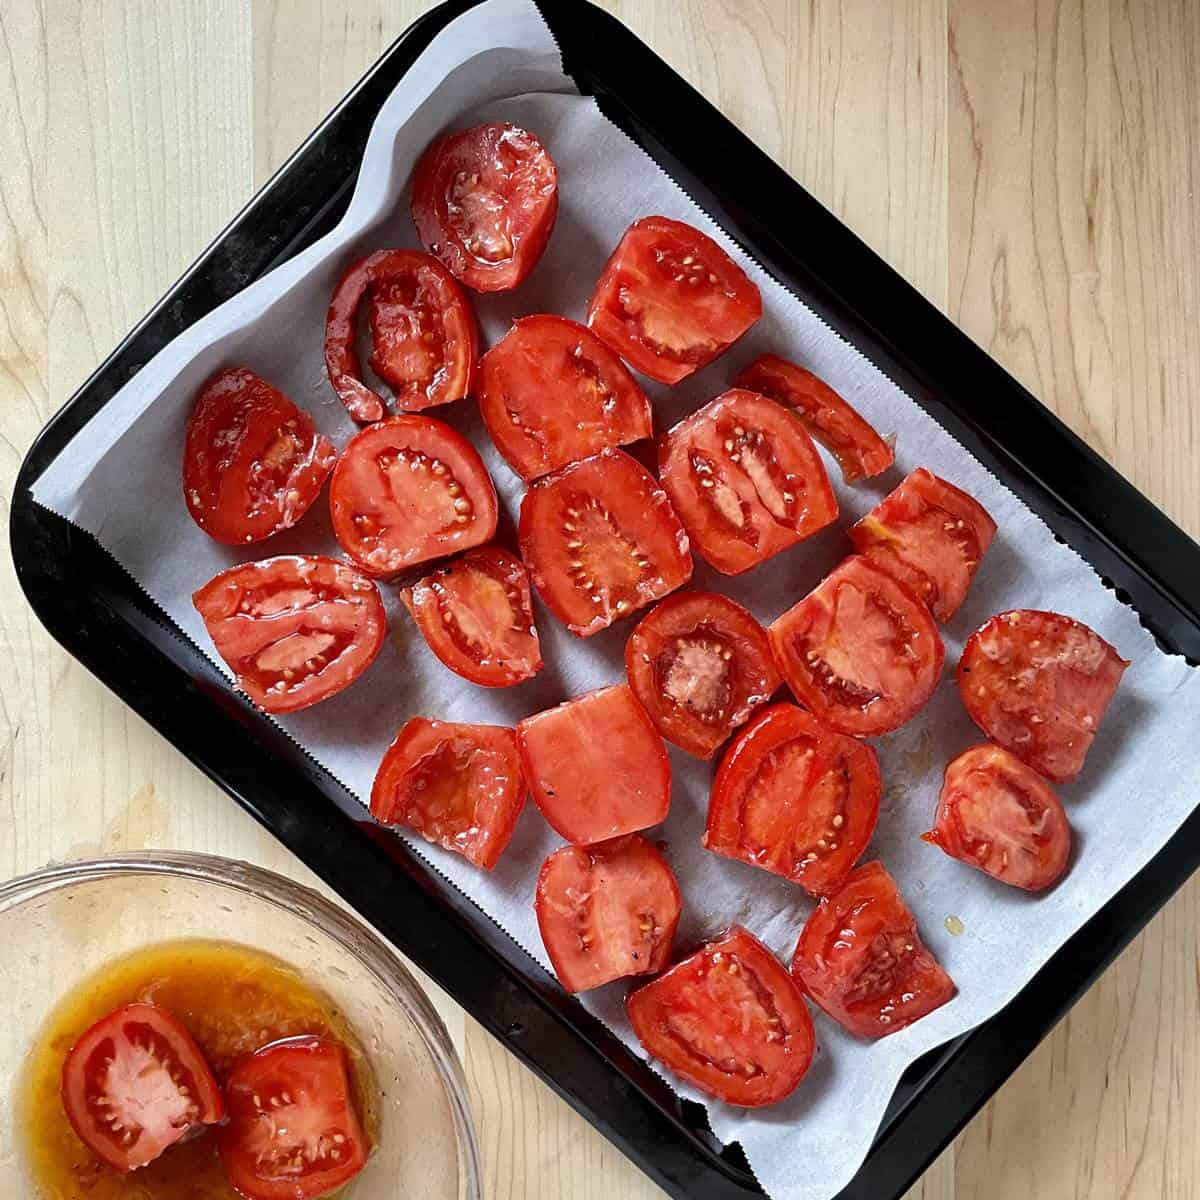 Sliced tomatoes placed on a parchment lined roasting pan.